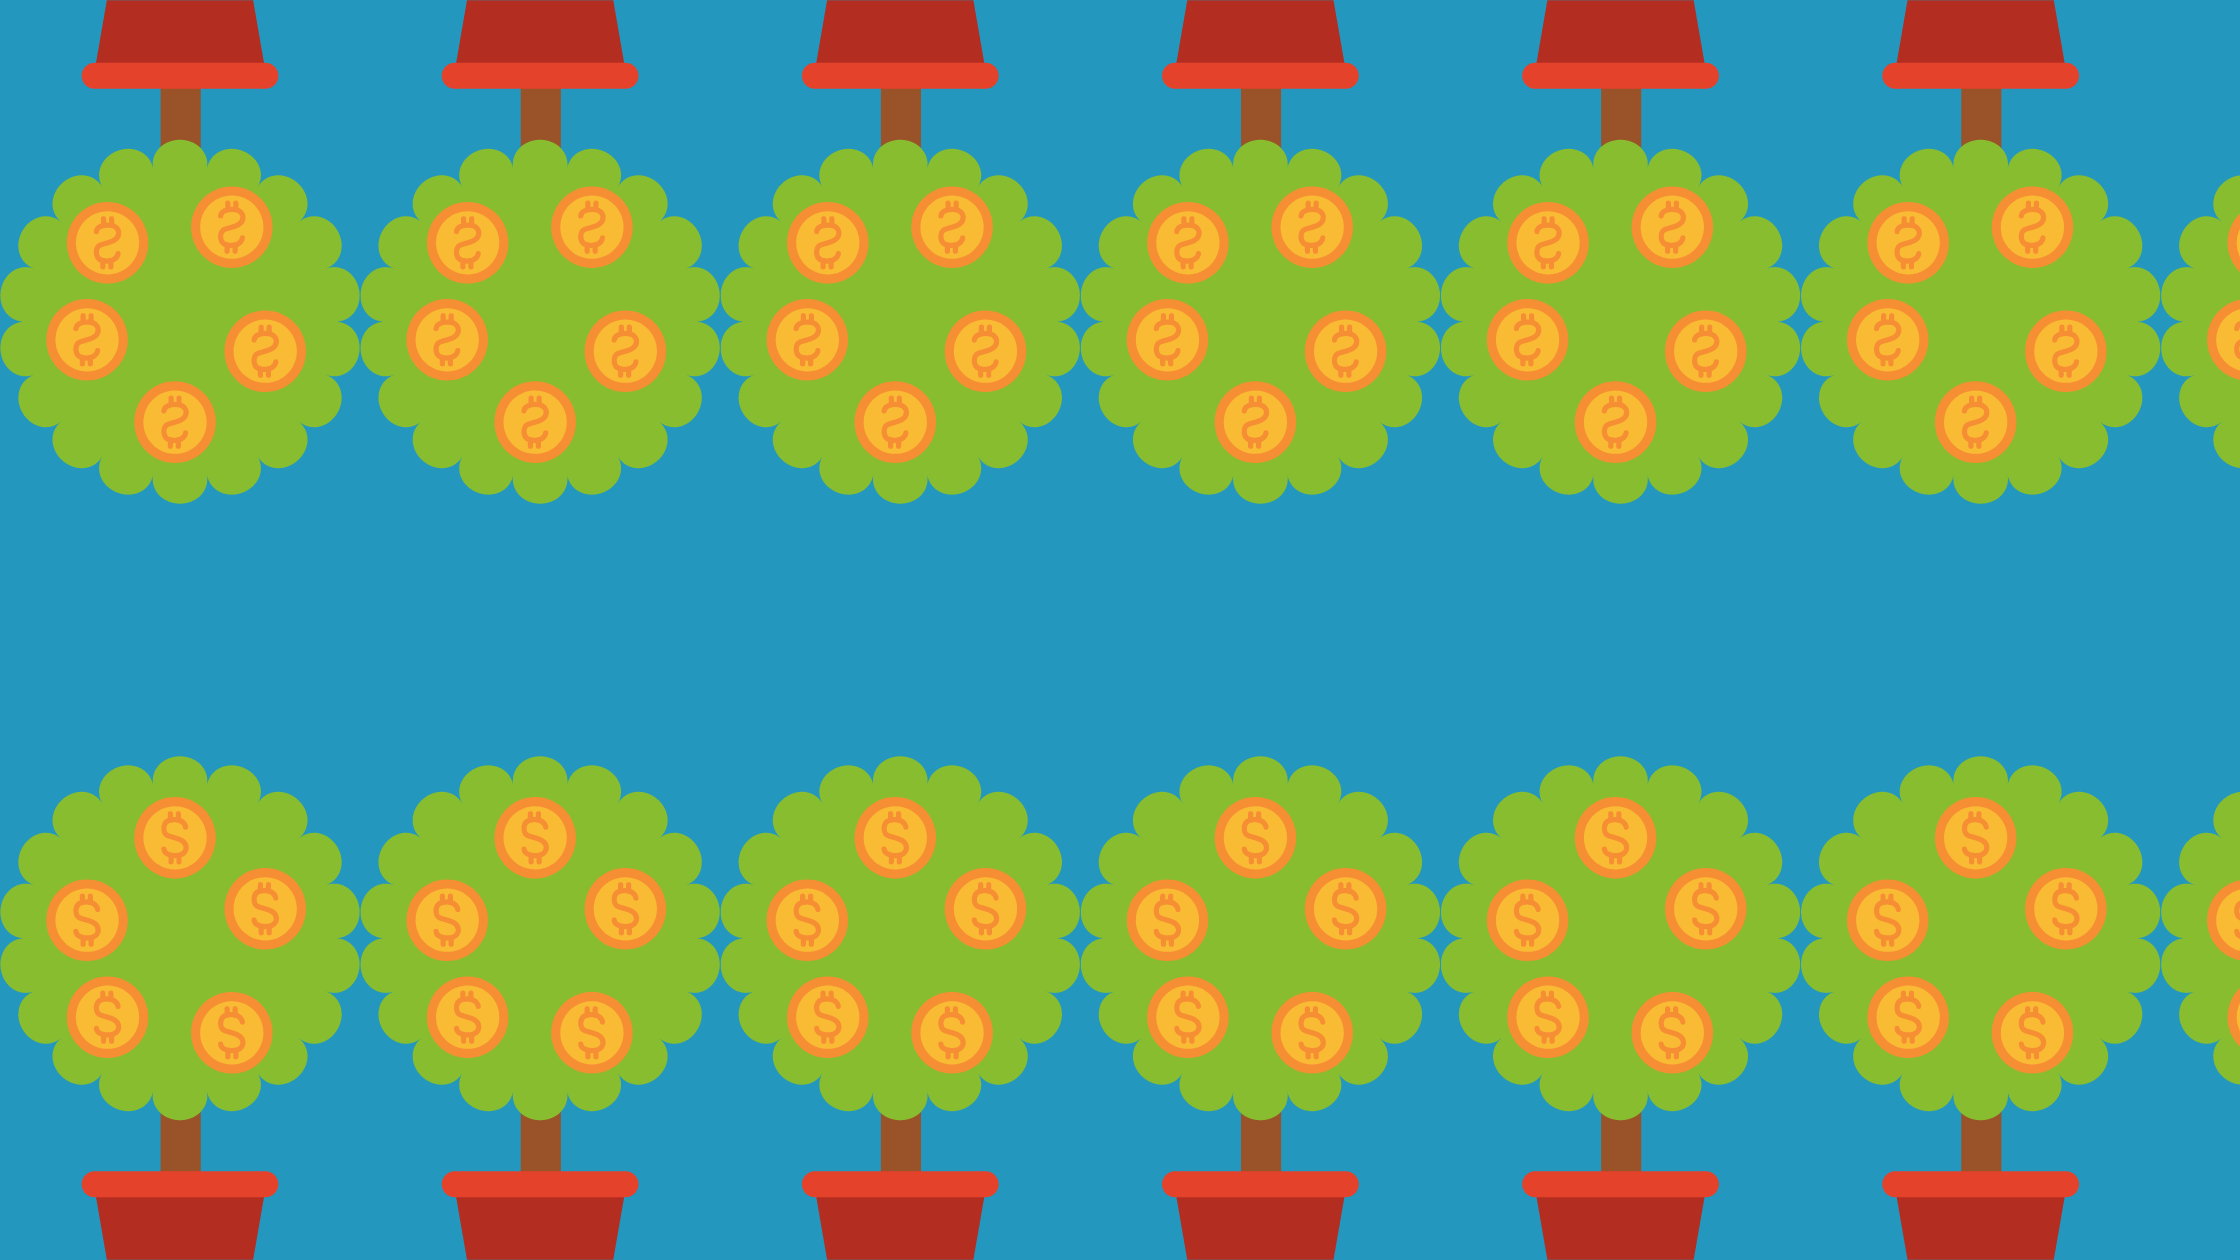 A repeating pattern of money trees